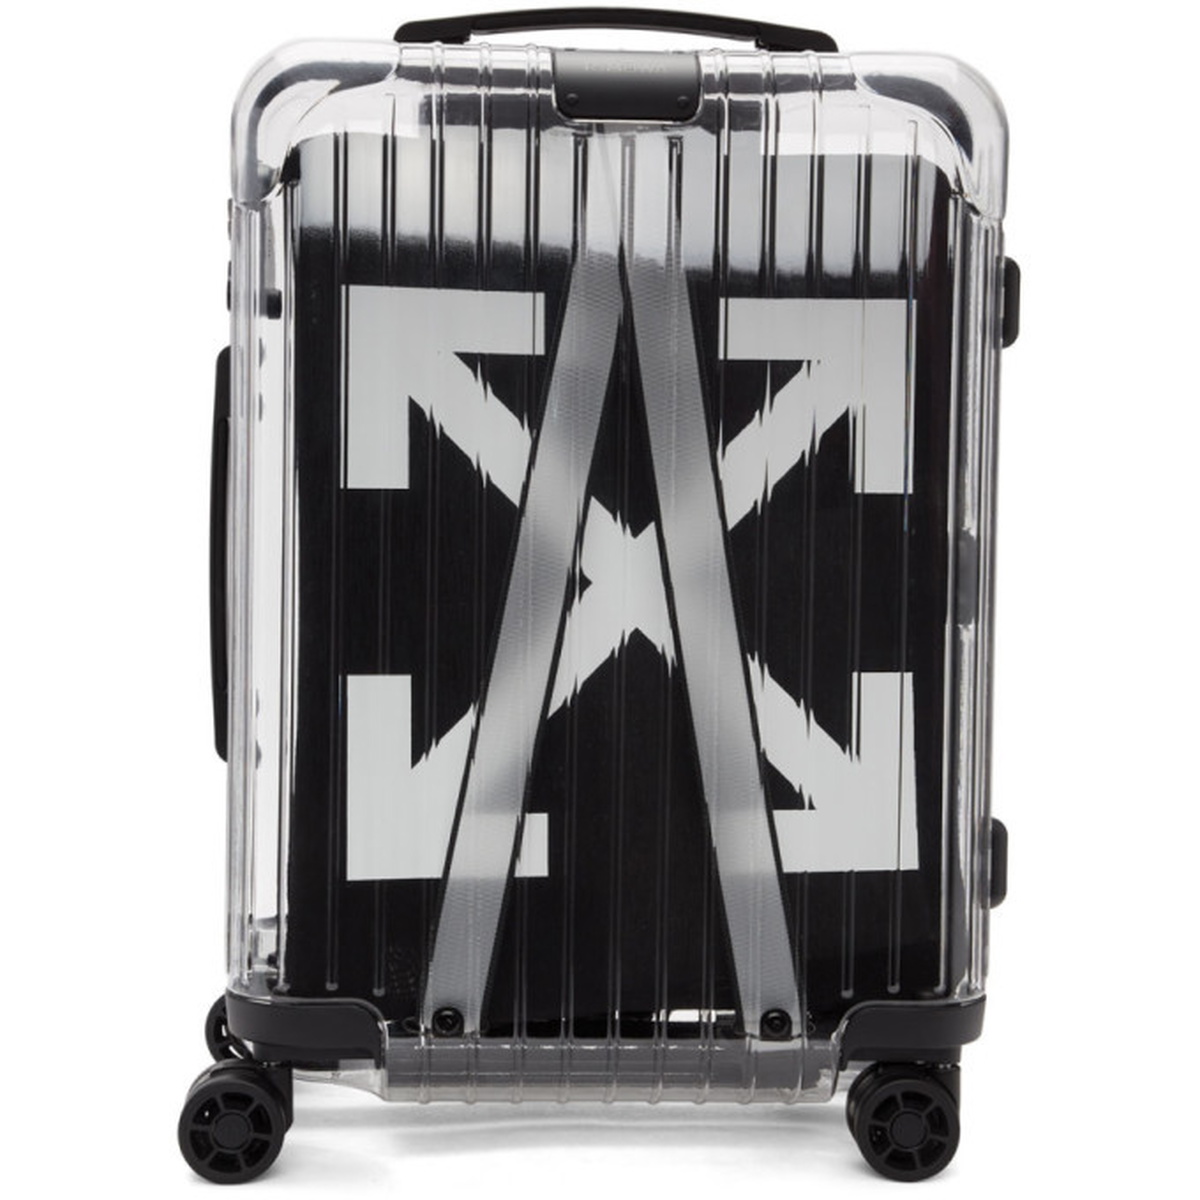 Off-White Black RIMOWA Edition See Through Carry-On Suitcase Off-White